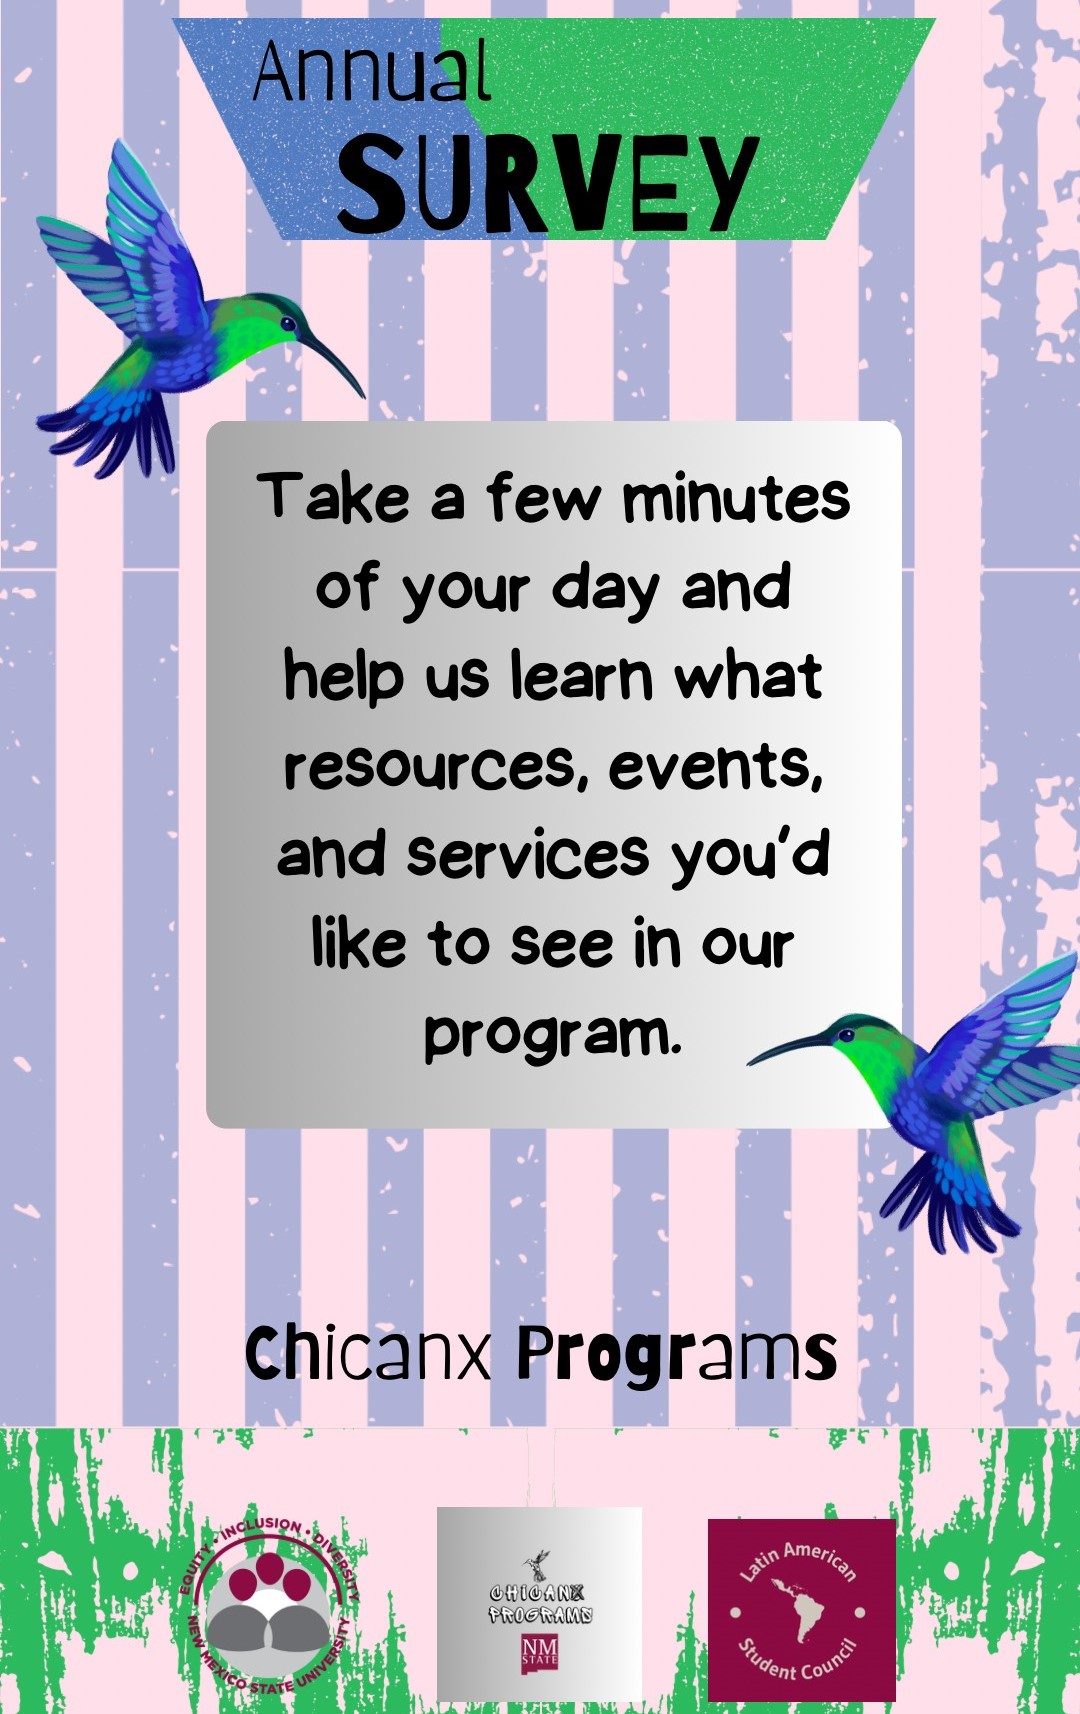 This is a picture of a flyer saying, Annual Survey, Take a few minutes of your day and help us learn what resources, events, and services you'd like to see in our program. Latin American Programs. The image is a colorful flyer for an "Annual Survey" organized by Chicanx Programs. The background features vertical stripes in pastel pink and lavender with distressed texture patterns. At the top, a triangular banner with a gradient from blue to green contains the text "Annual SURVEY" in black and green letters. The main message is displayed in a central, gray box with rounded corners, written in a casual, black font. On either side of the gray box are two colorful hummingbirds facing inward, one on the left and one on the right, with vibrant green, blue, and purple feathers. Below the gray box, the words "Chicanx Programs" are written with "Chicanx" in black and "Programs" in bold black. At the bottom, there are three logos against a green and pink distressed background. The logos represent: “Equity, Inclusion, Diversity” with a crest of New Mexico State University, “Chicanx Programs NMSU” in black and white, and “Latin American Student Council” with a map of Latin America.